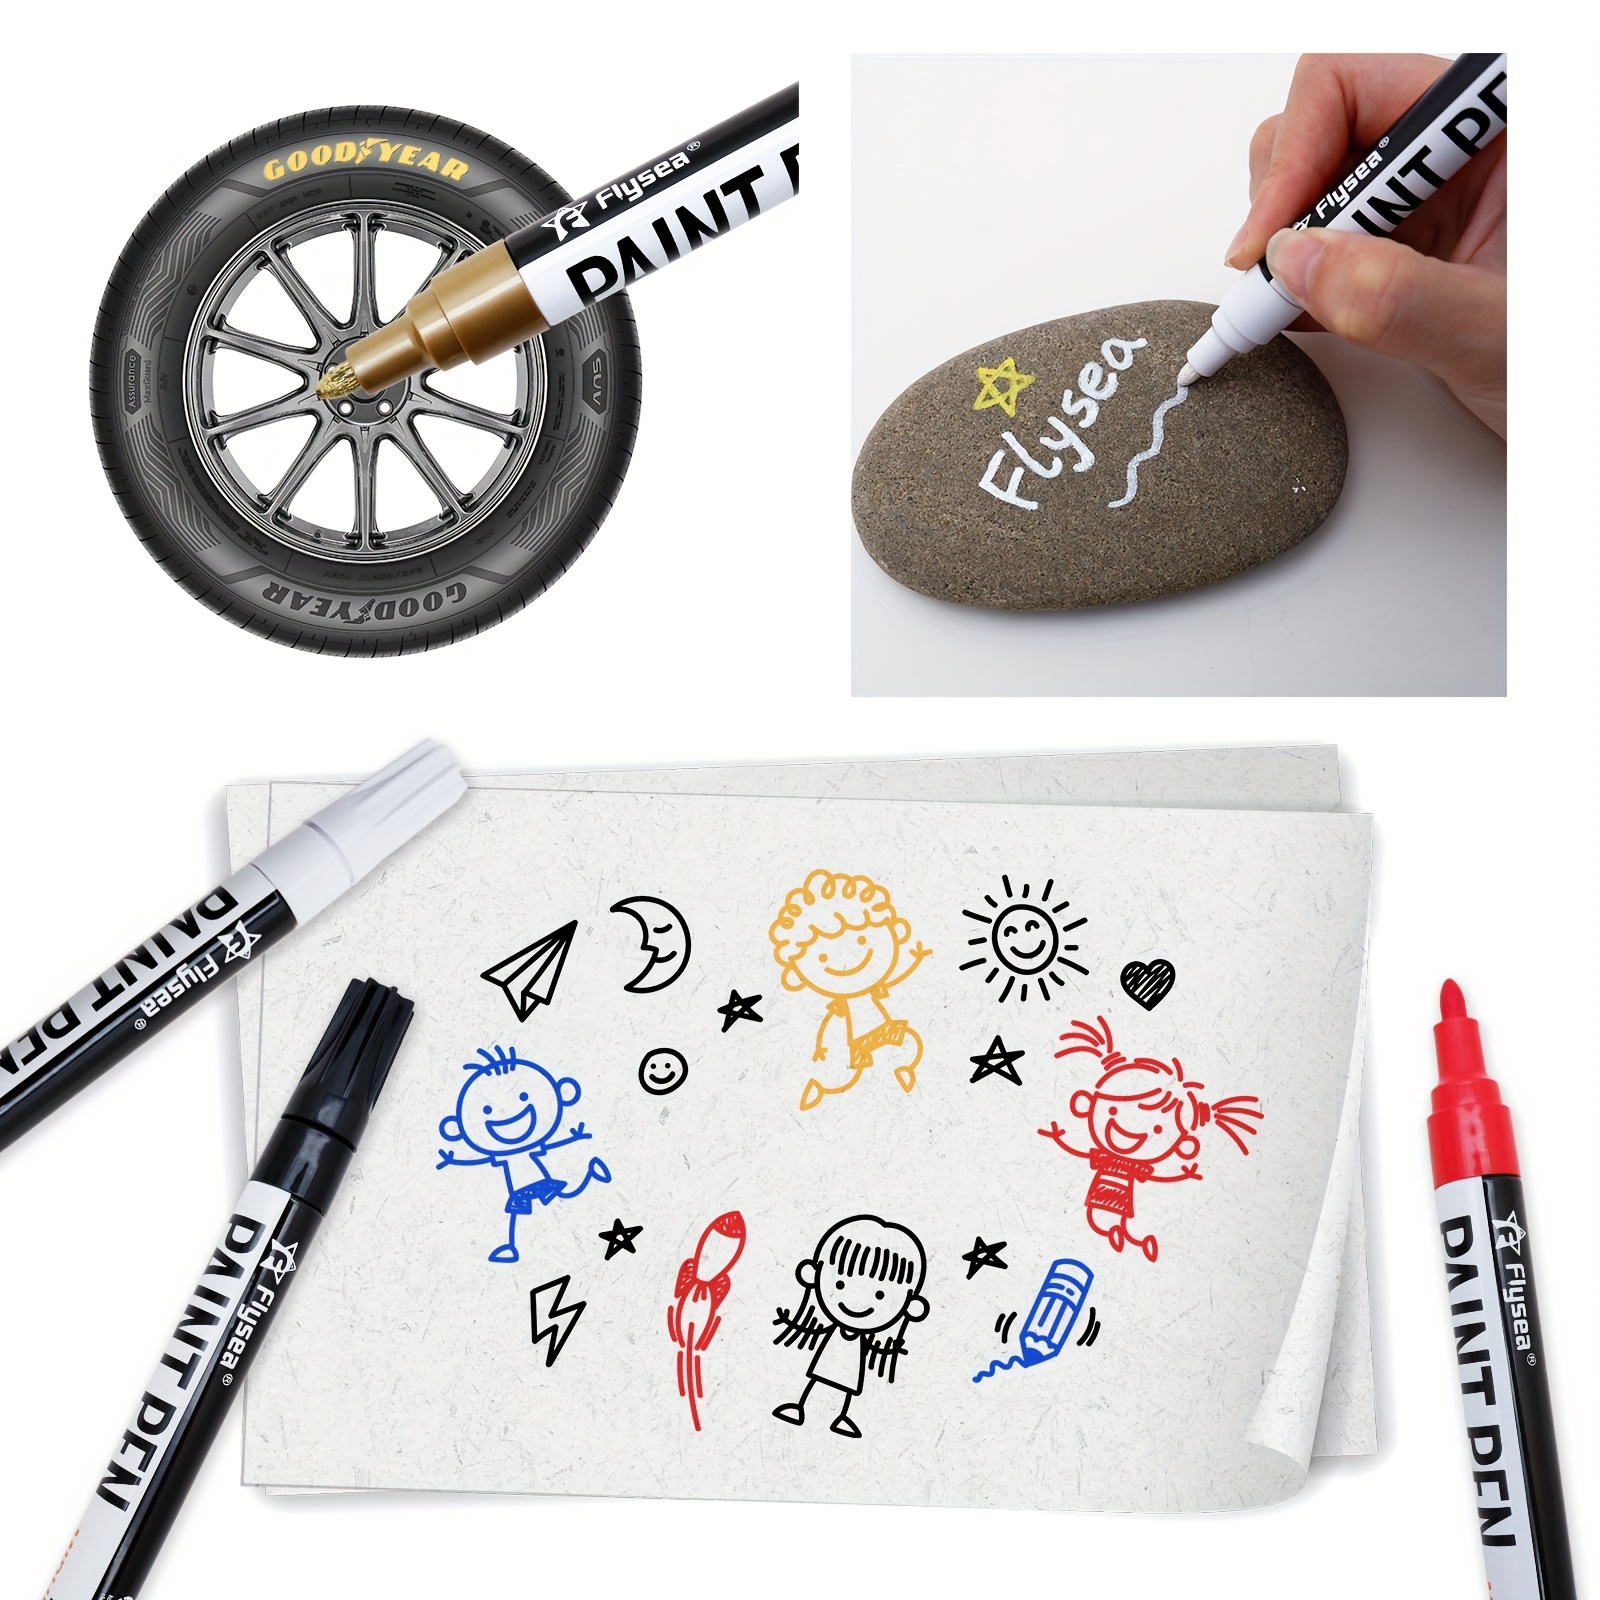 Paint Pens Paint Markers on Almost Anything Never Fade Quick Dry and  Permanent Oil-Based Waterproof Paint Marker Pen Set for Rocks Painting Wood  Fabric Plastic Canvas Glass Mugs DIY Craft 12 colors